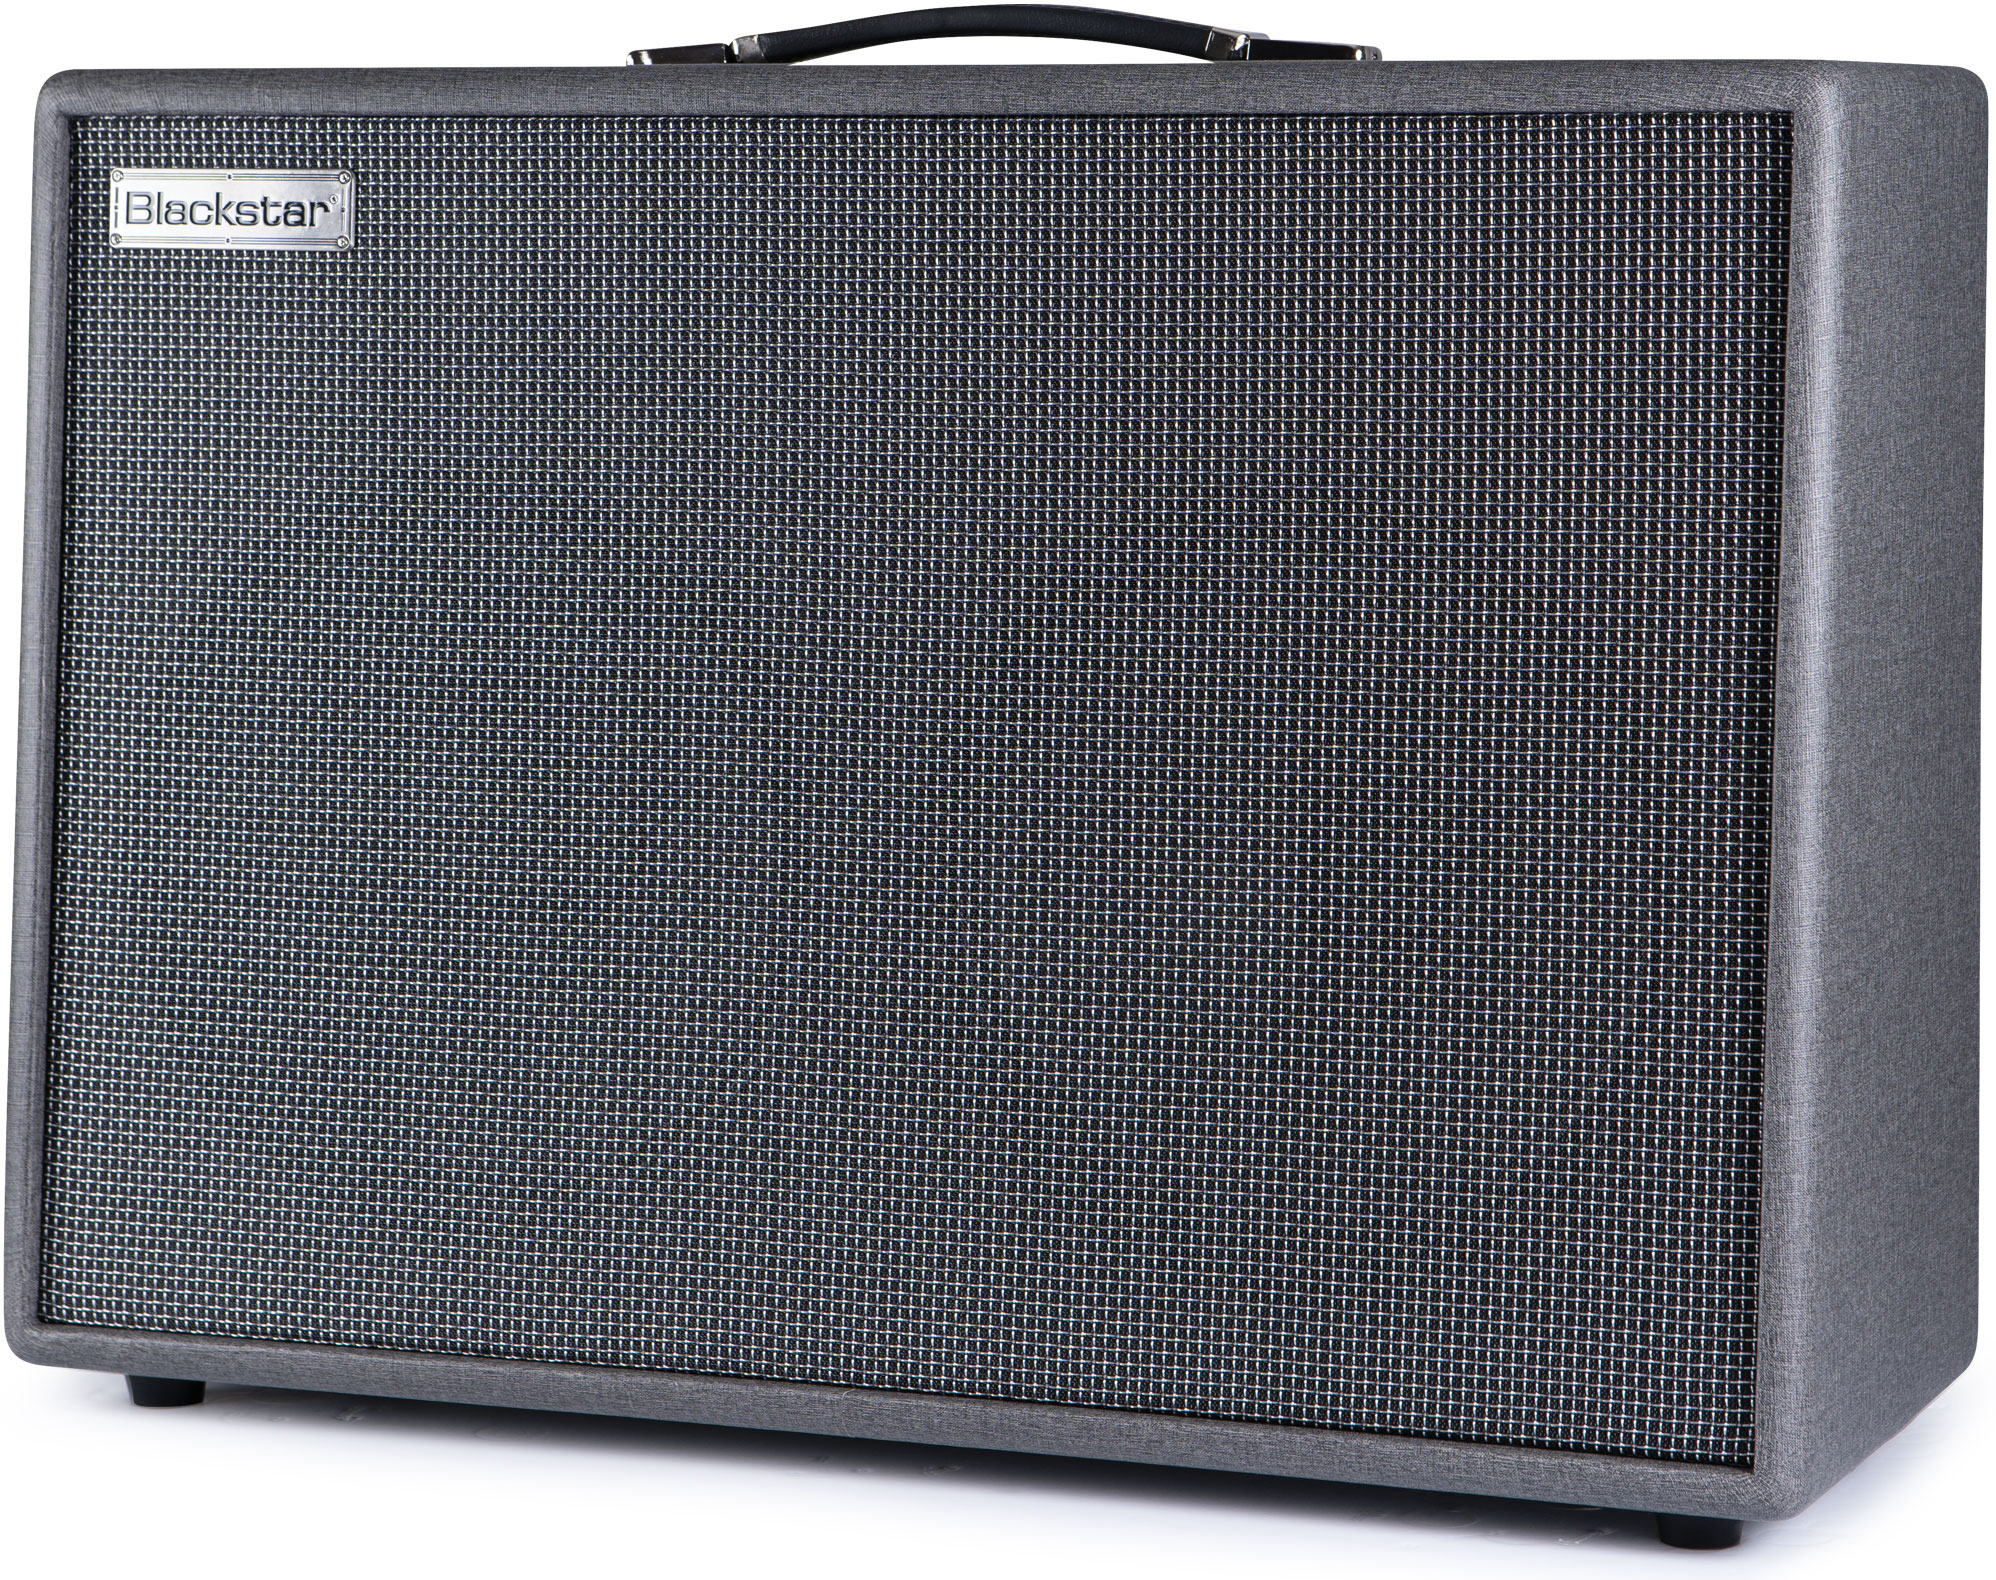 Blackstar Silverline Stereo Deluxe 2x100w 2x12 - Electric guitar combo amp - Main picture